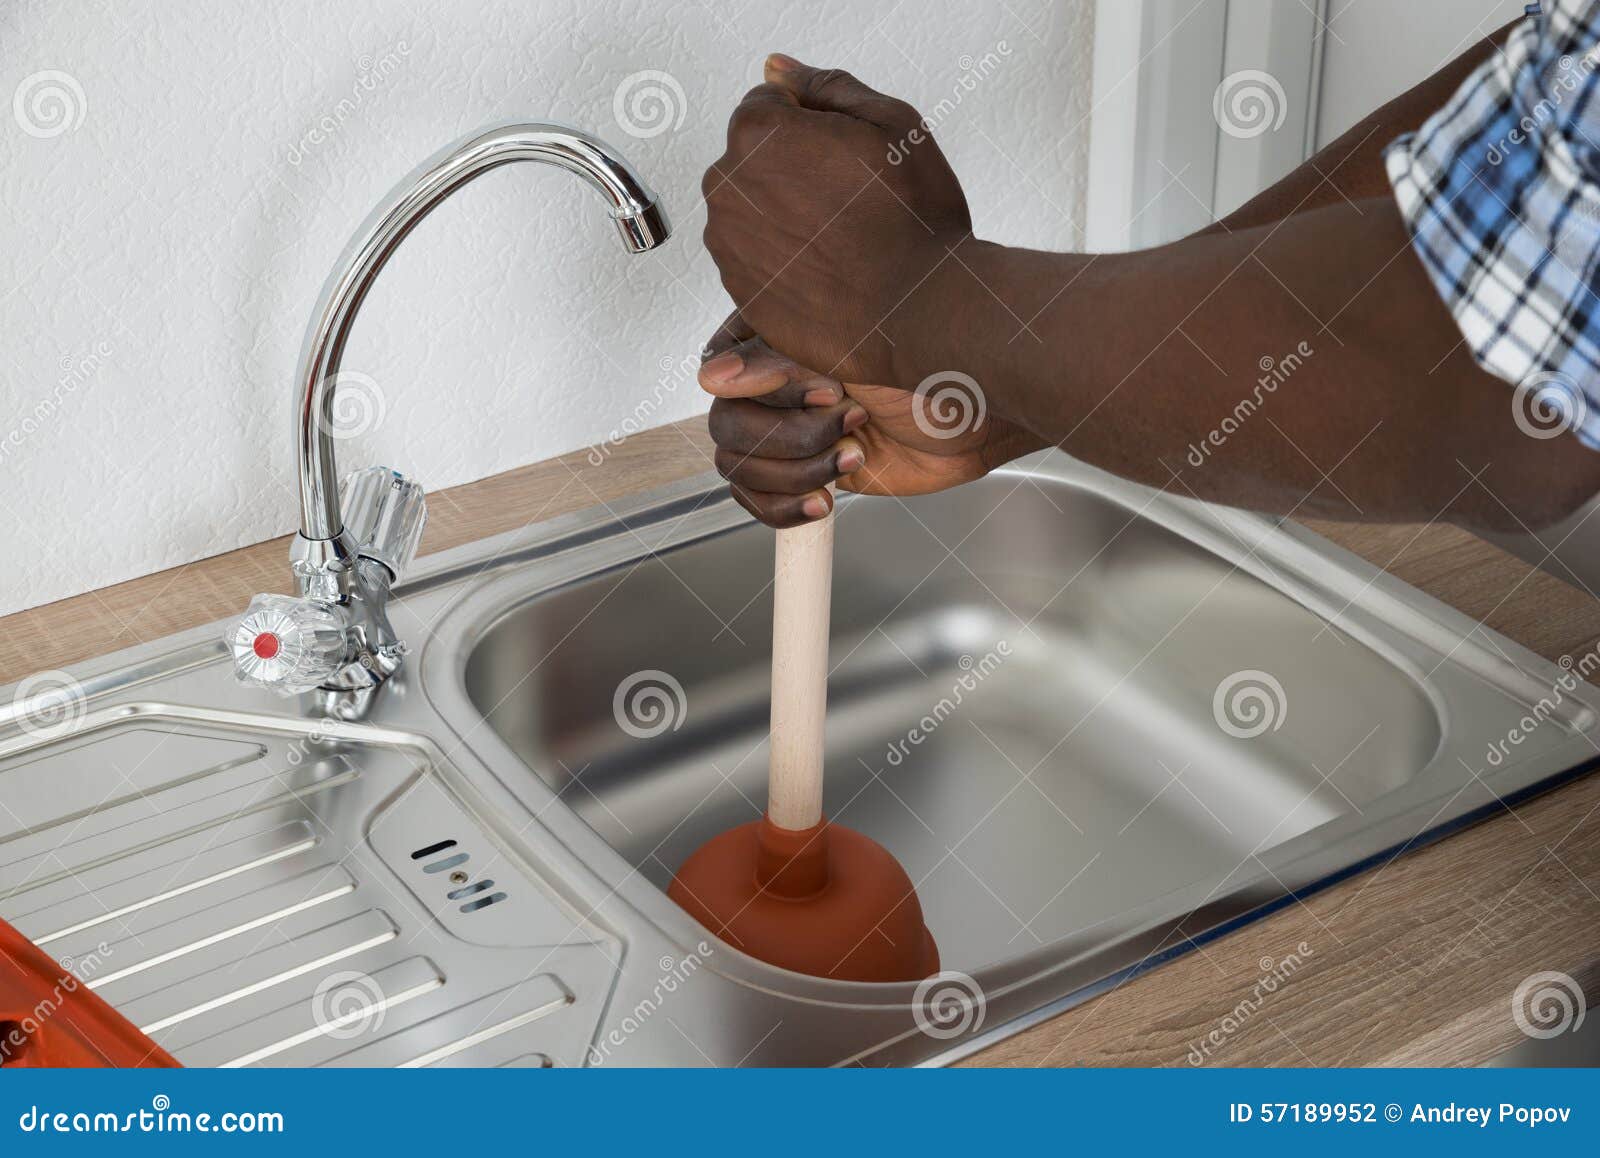 Premium Photo  Clogged pipes in the kitchen sink full of dirty water red  plunger